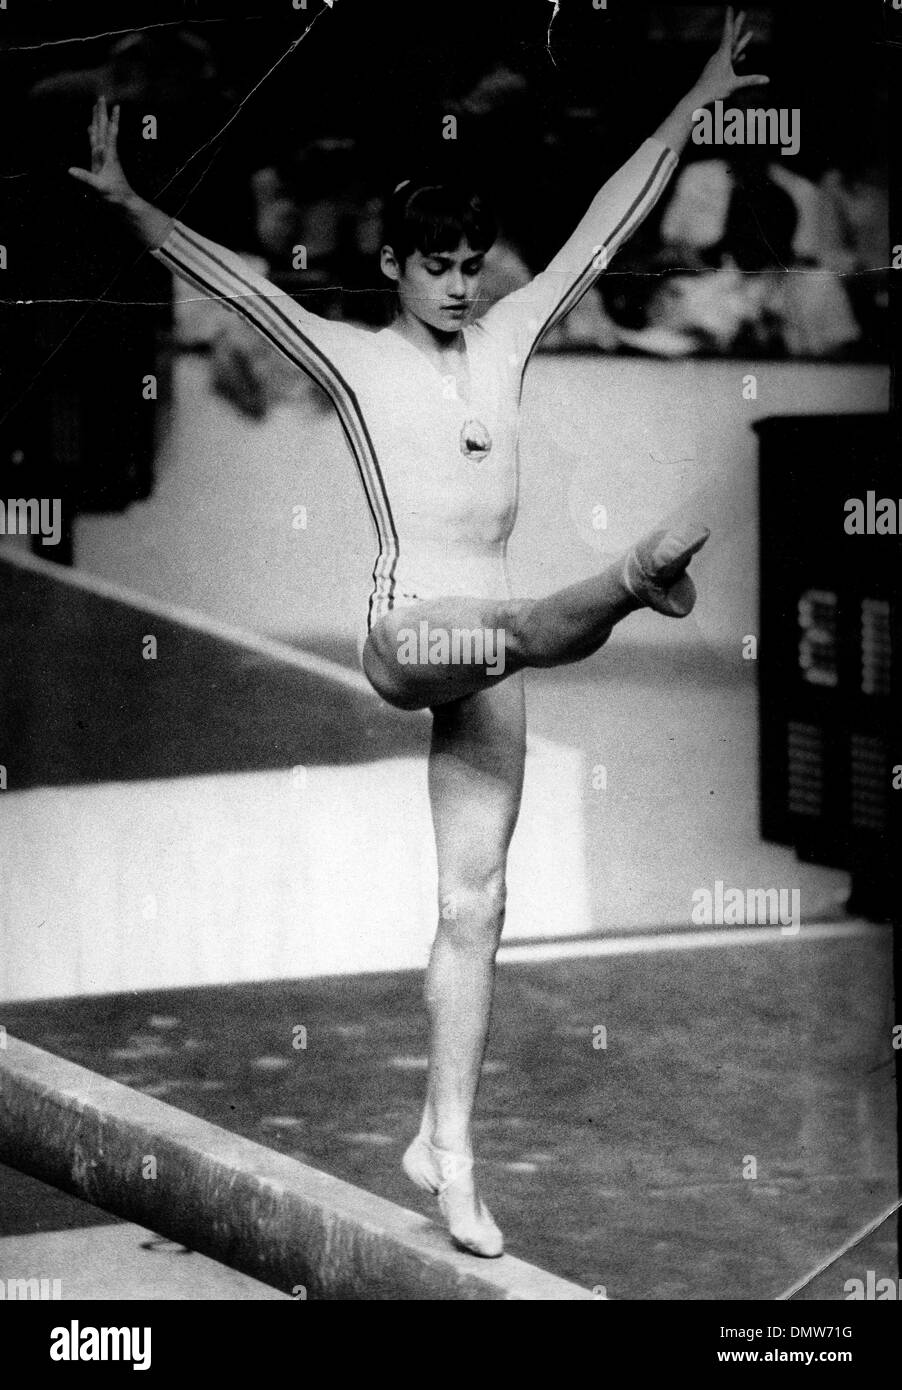 July 22, 1976 - Montreal, Canada - Fourteen year old Olympic Champion NADIA COMANECI competing on the balance beam during the Montreal Olympics. (Credit Image: © KEYSTONE Pictures USA/ZUMAPRESS.com) Stock Photo